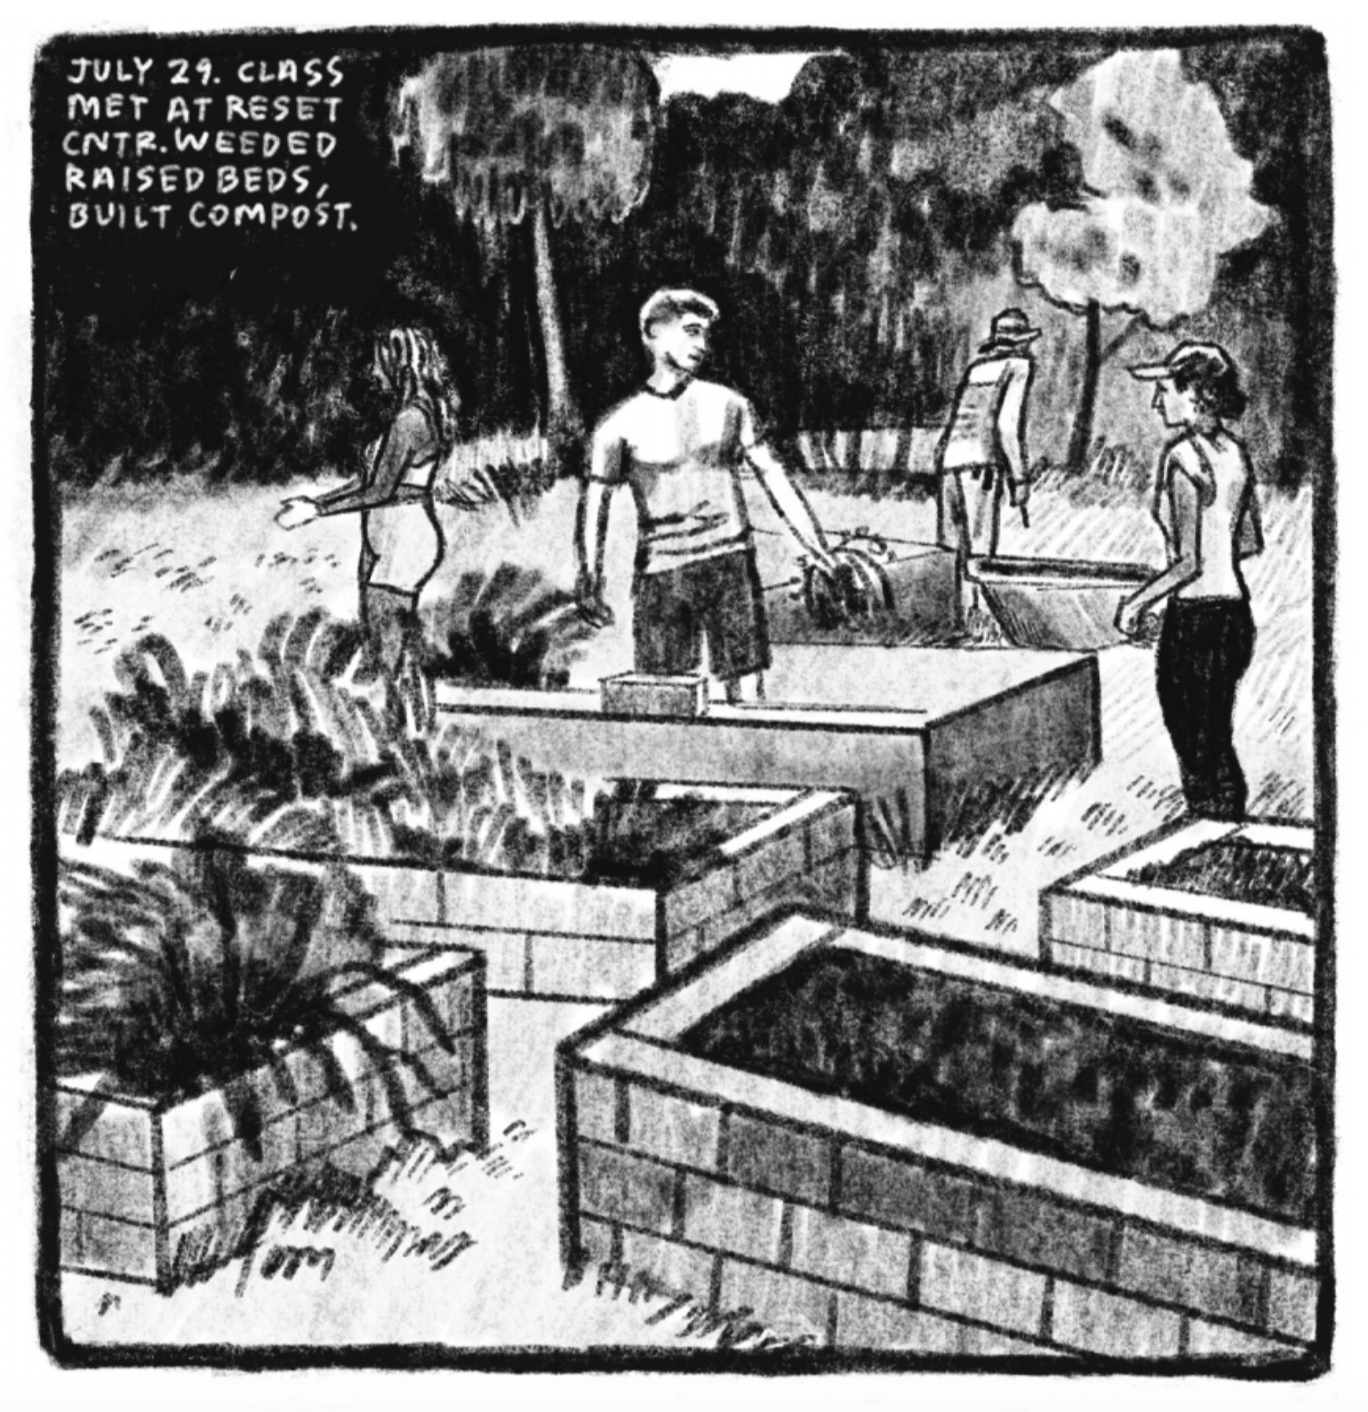 3. Four people stand outside around five raised garden beds. They are standing in grass, and there are trees in the background. Two of the beds are full of plants, two look full of soil. A man in shorts and a t-shirt stands in the last one, which looks empty; he has a clump of weeds in his hand. He looks to be communicating with a woman across from him, who wears a baseball cap, a muscle tee, and pants. Another person stands by a wheel barrow in the back, facing the trees. The last person faces to the left, away from the others; they seem to be talking to someone off-panel. This person has long wavy hair and is wearing a sports bra, bicycle shorts, and gardening gloves. â€œJuly 29. Class met at Reset Center. Weeded raised beds, built compost.â€